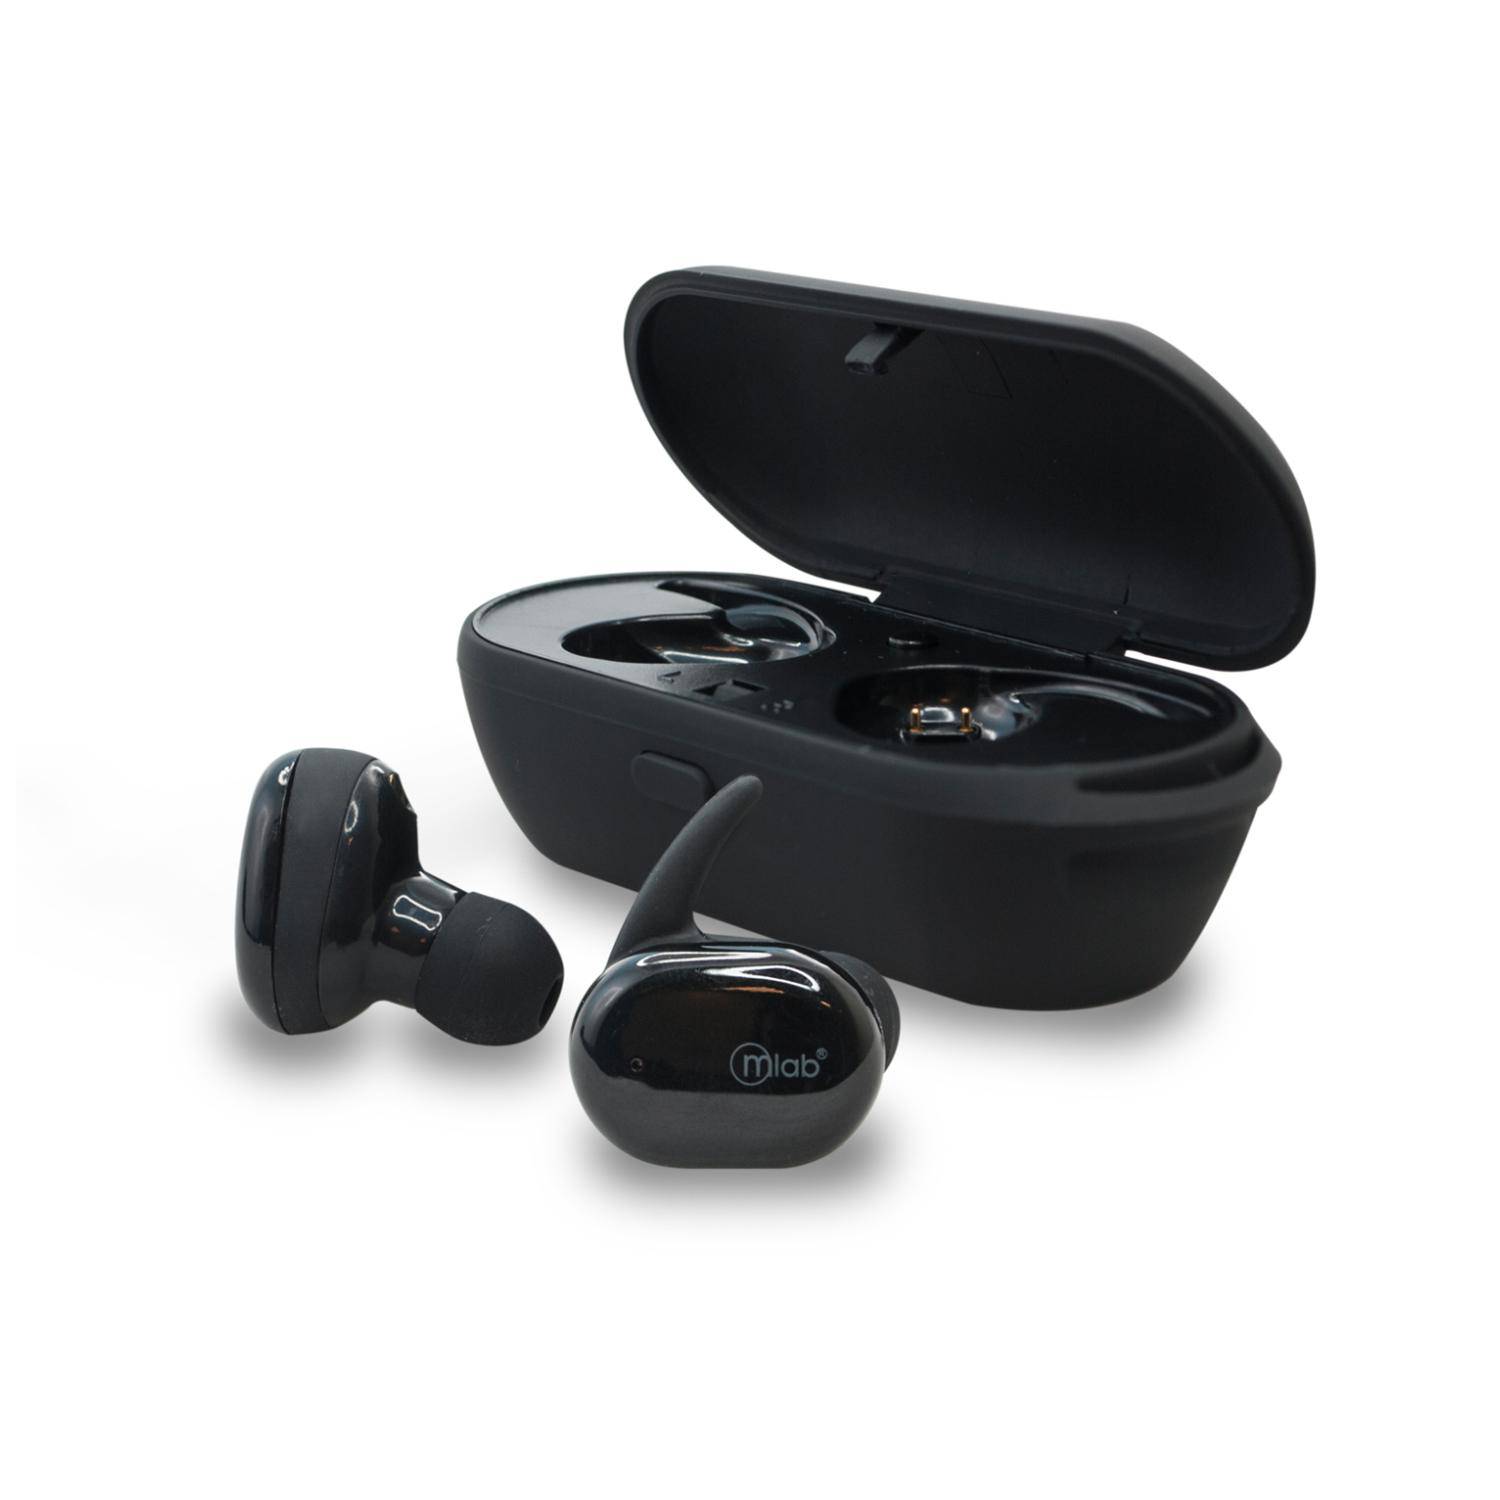 Auricular Bluetooth 5.0 Deportivo Inalámbrico In Ear Touch Color Negro